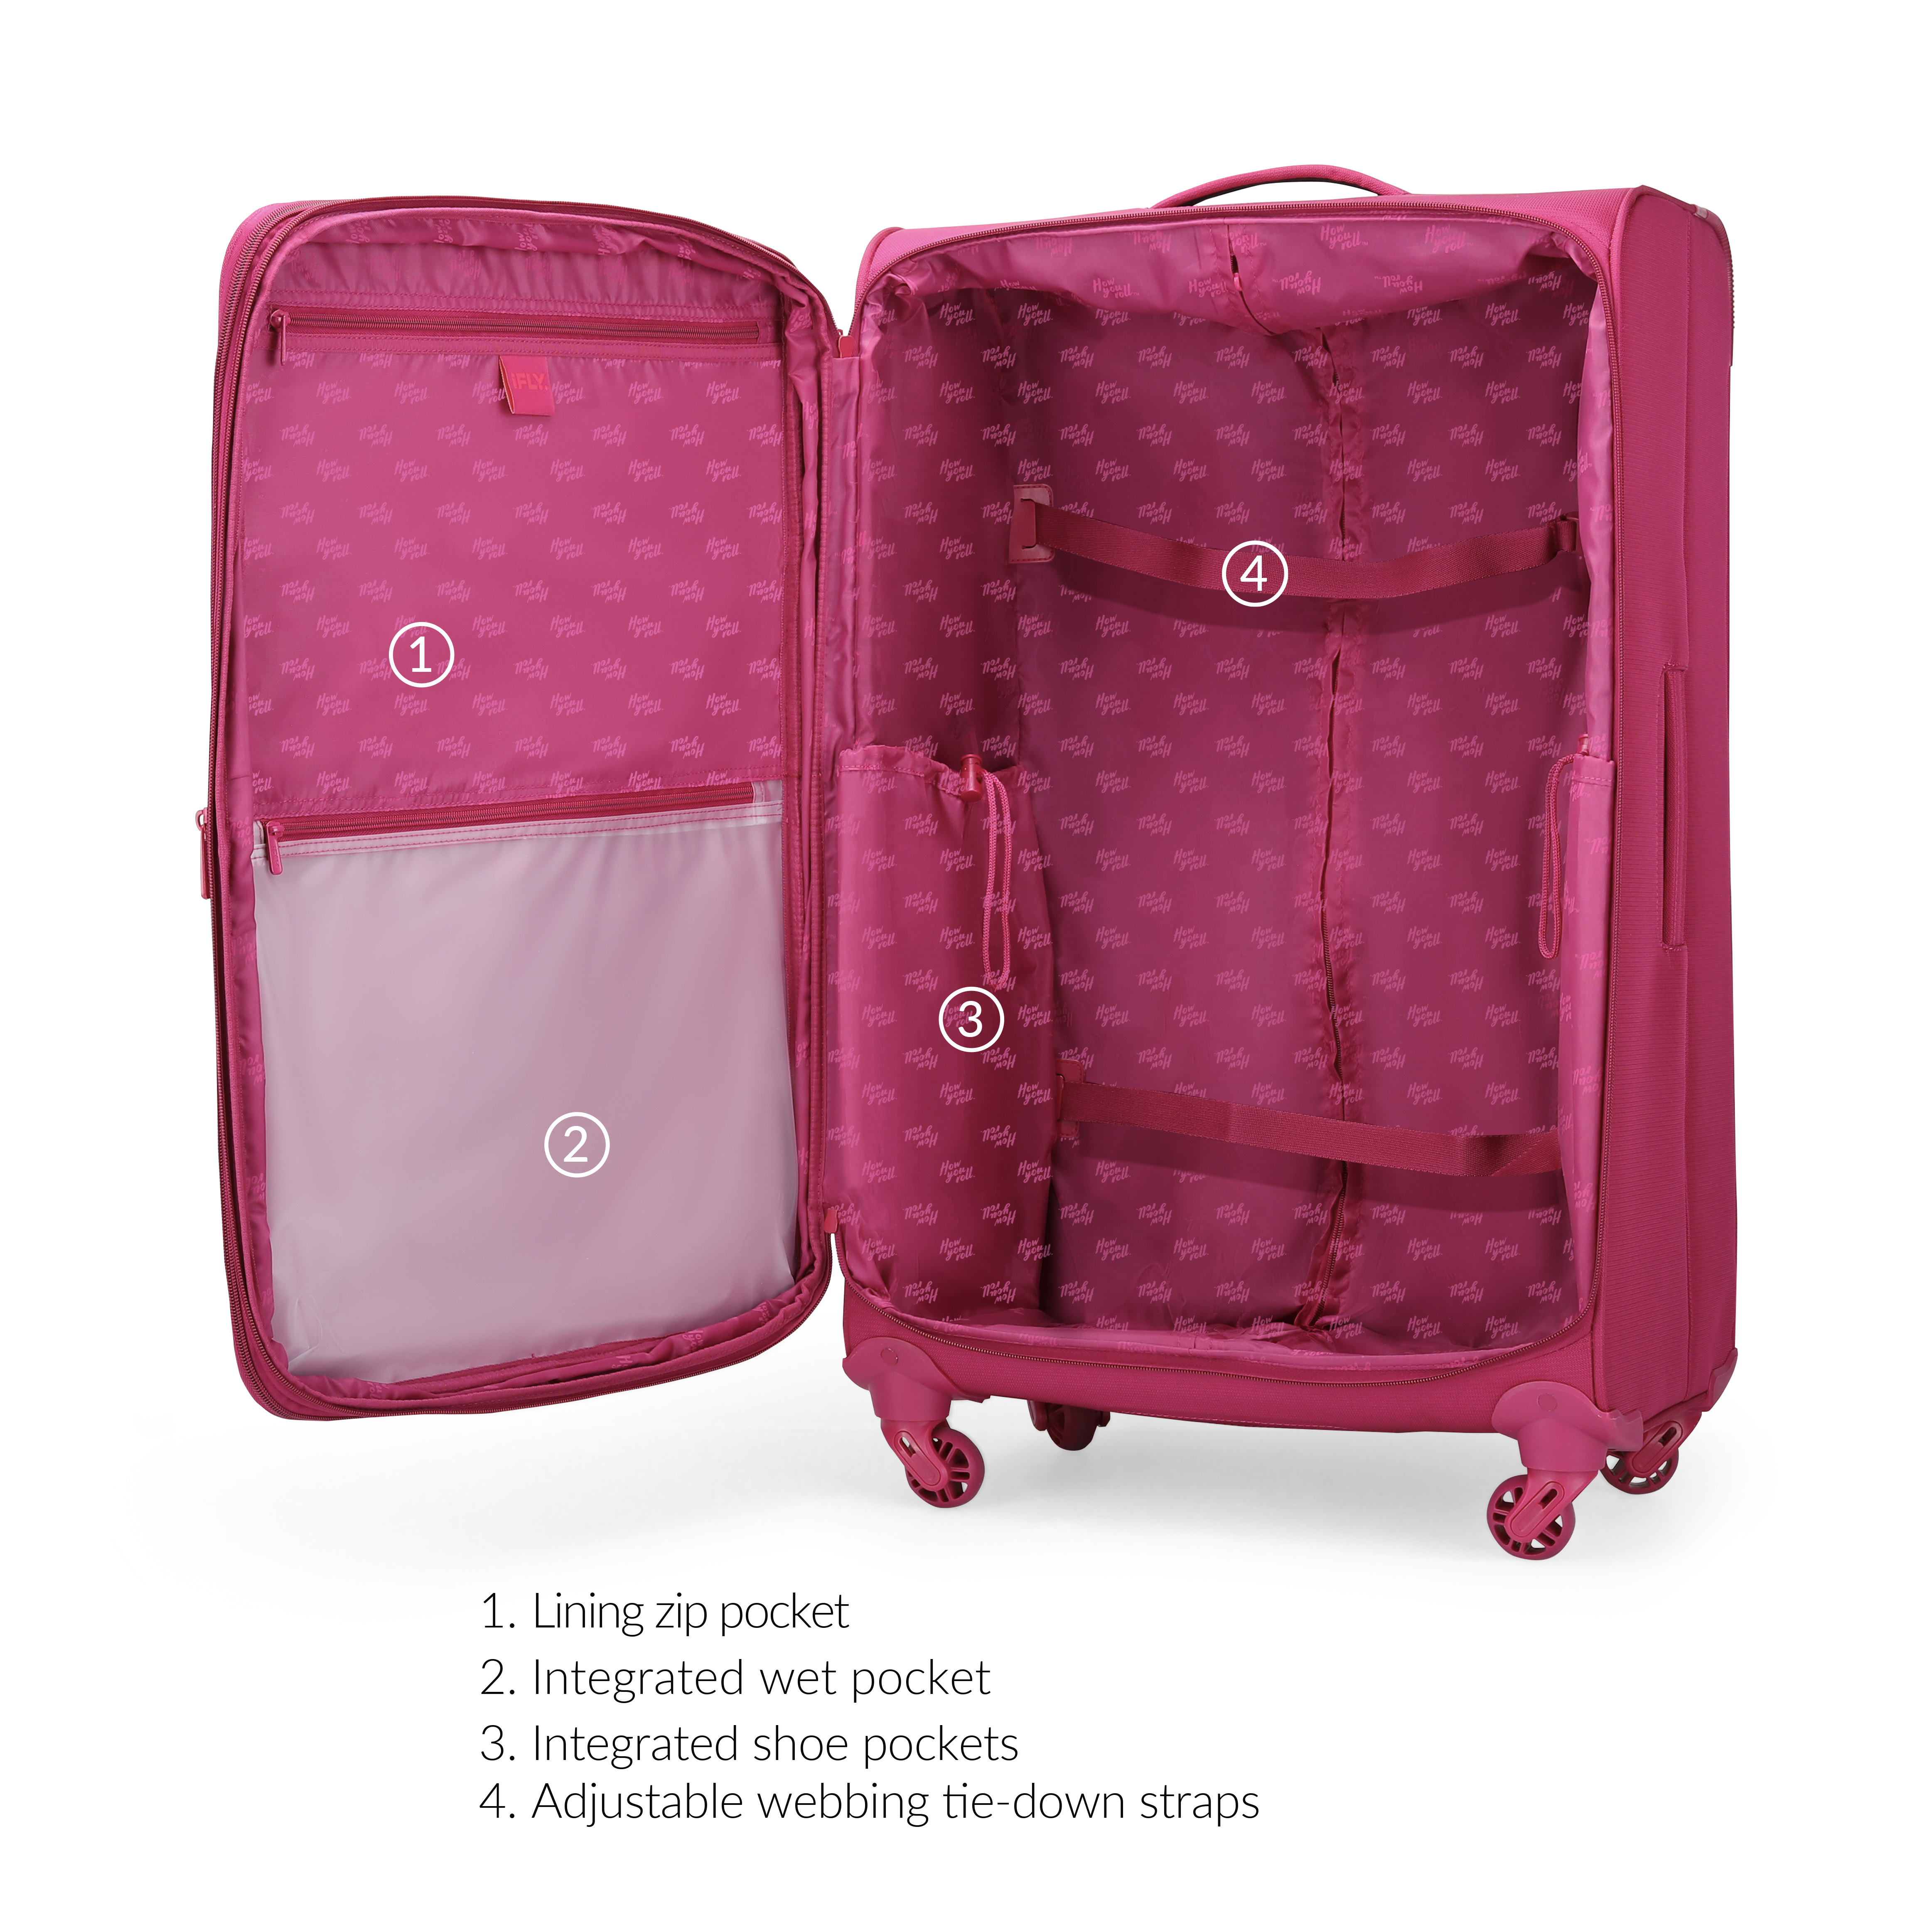 iFLY Softside Passion 24" Checked Luggage, Fuchsia - image 4 of 8